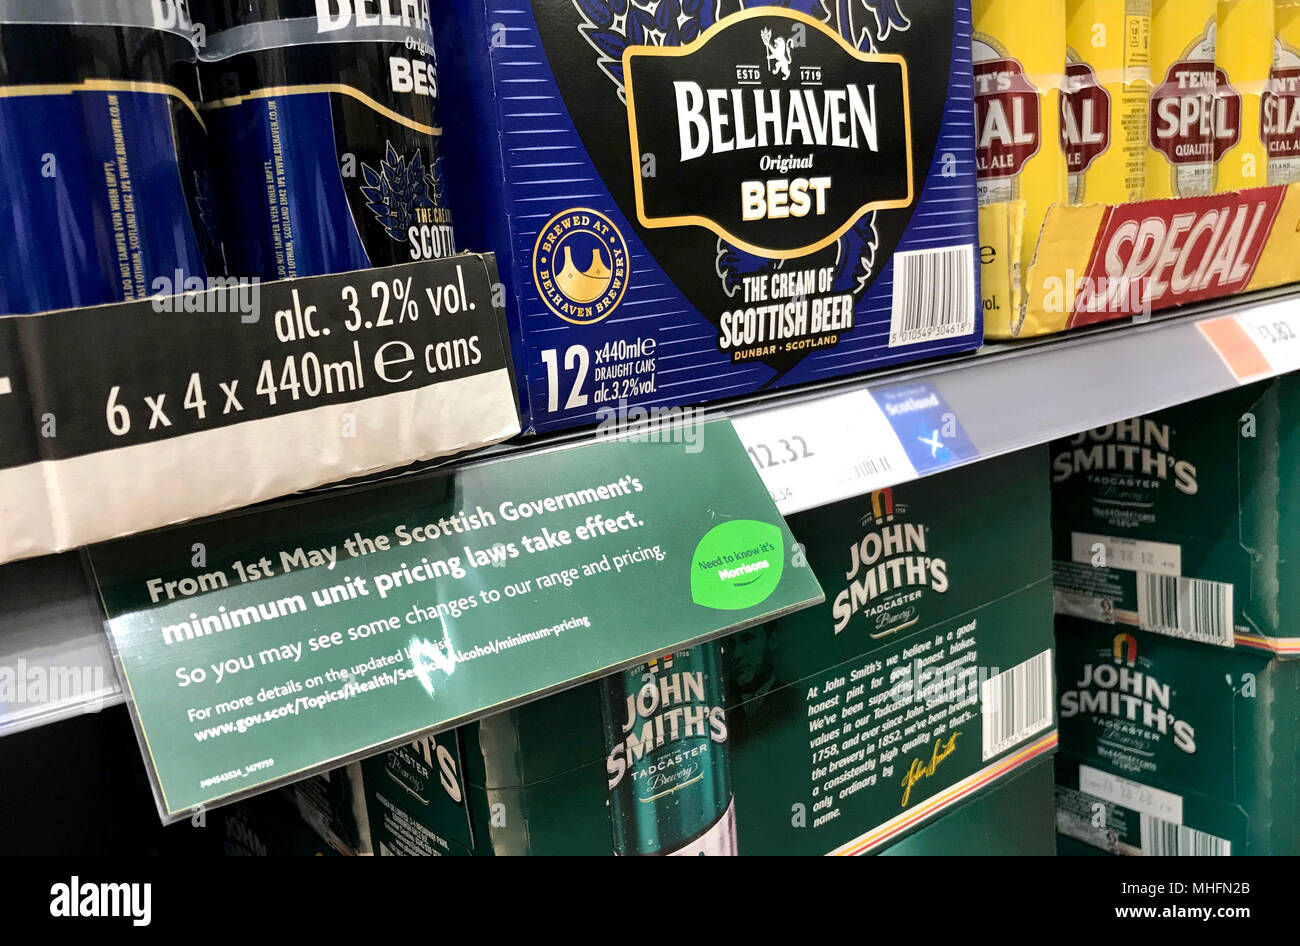 Alcohol for sale in an Edinburgh supermarket as Scotland has become the first country in the world to introduce minimum unit pricing for drinks. Stock Photo